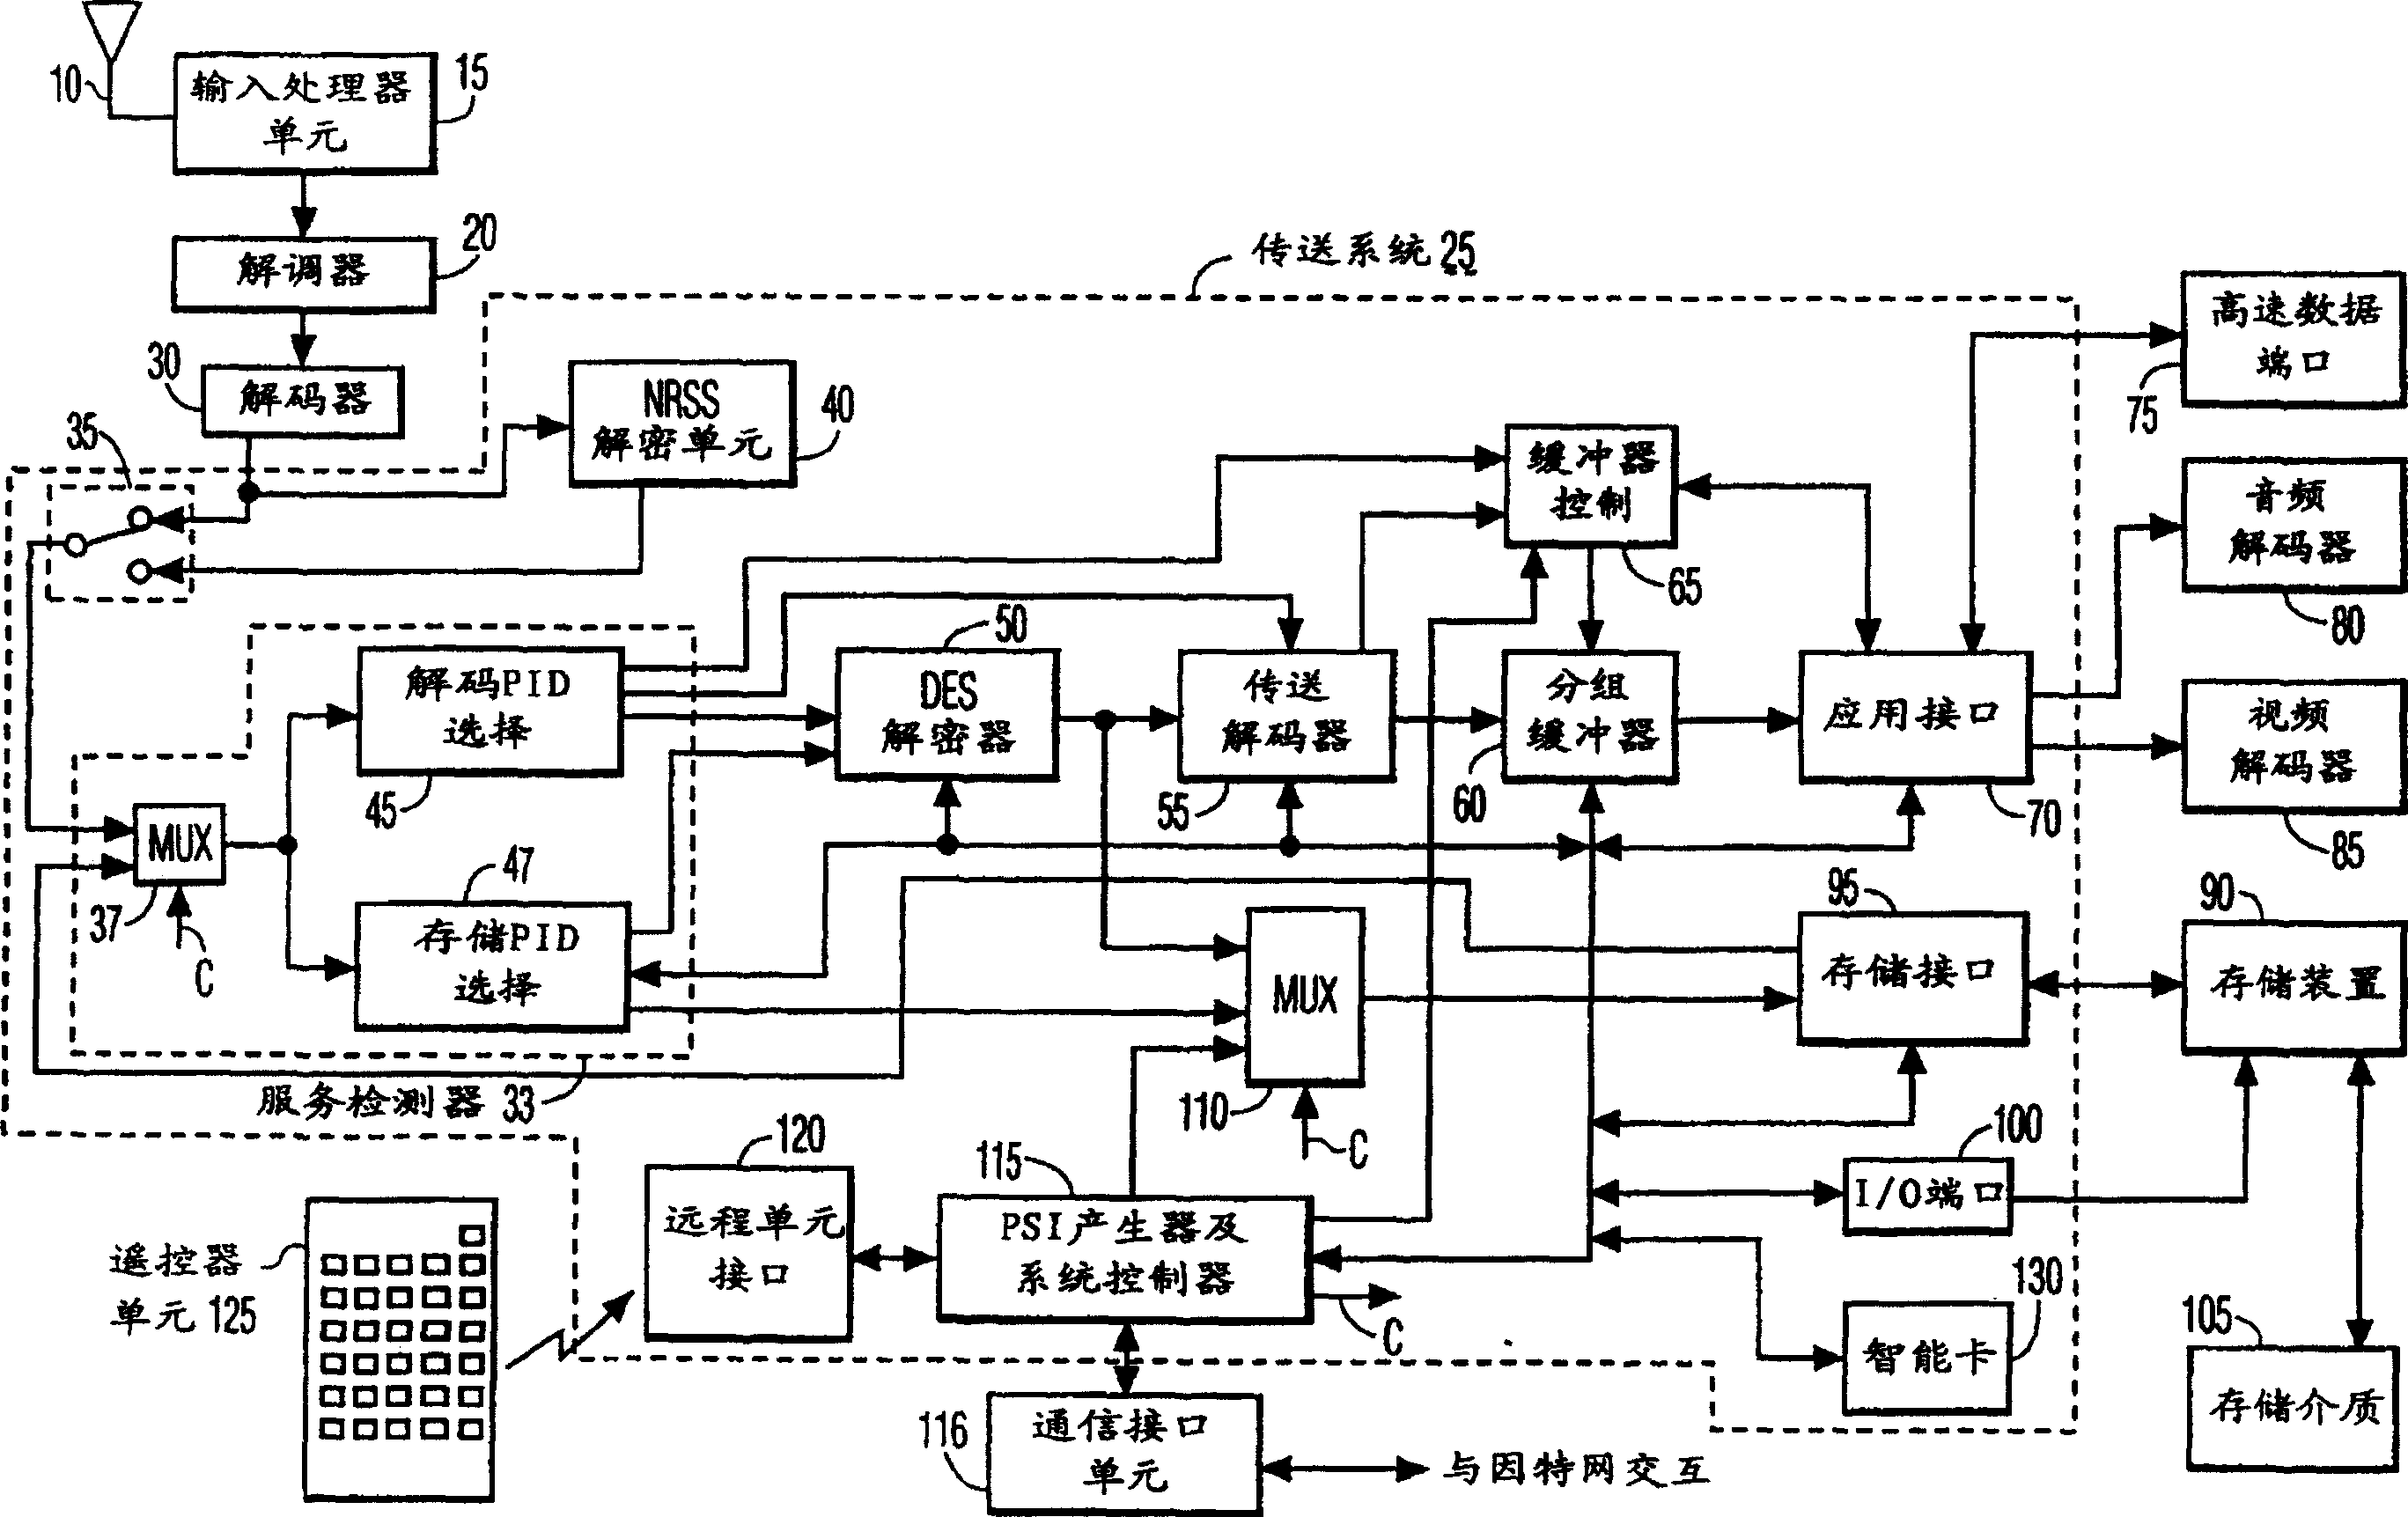 Method and interface for incorporating program information into electronic message, system for transferring program information via electronic message and electronic message receiver